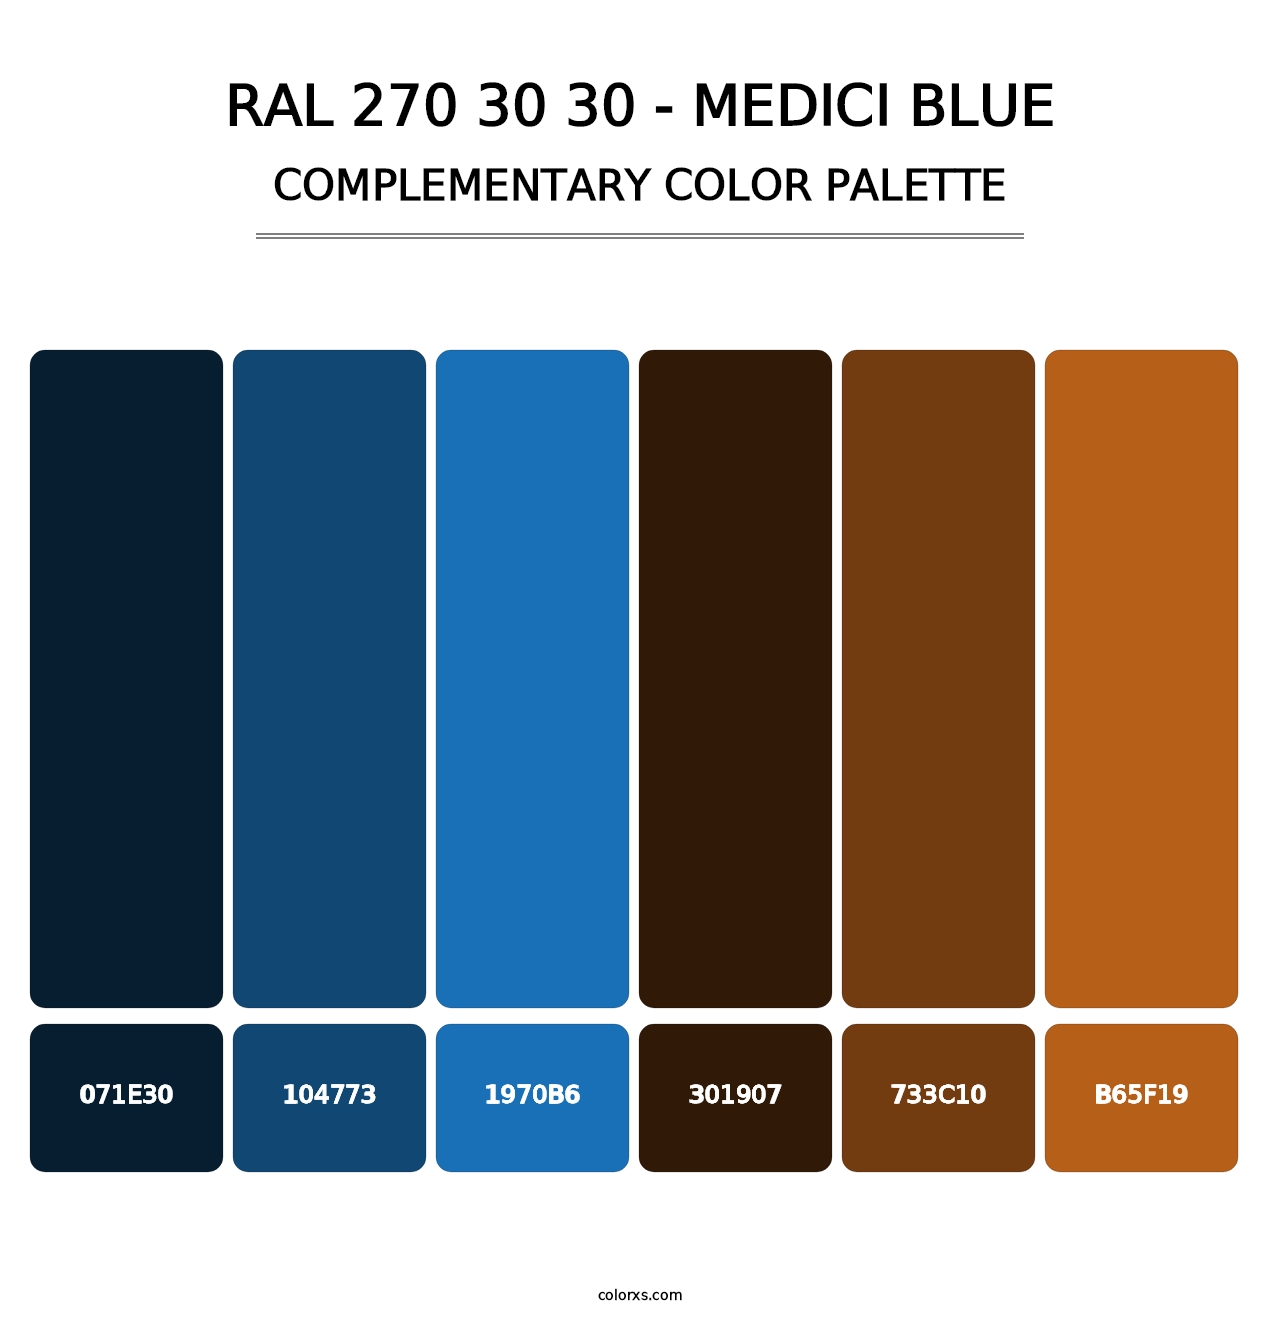 RAL 270 30 30 - Medici Blue - Complementary Color Palette